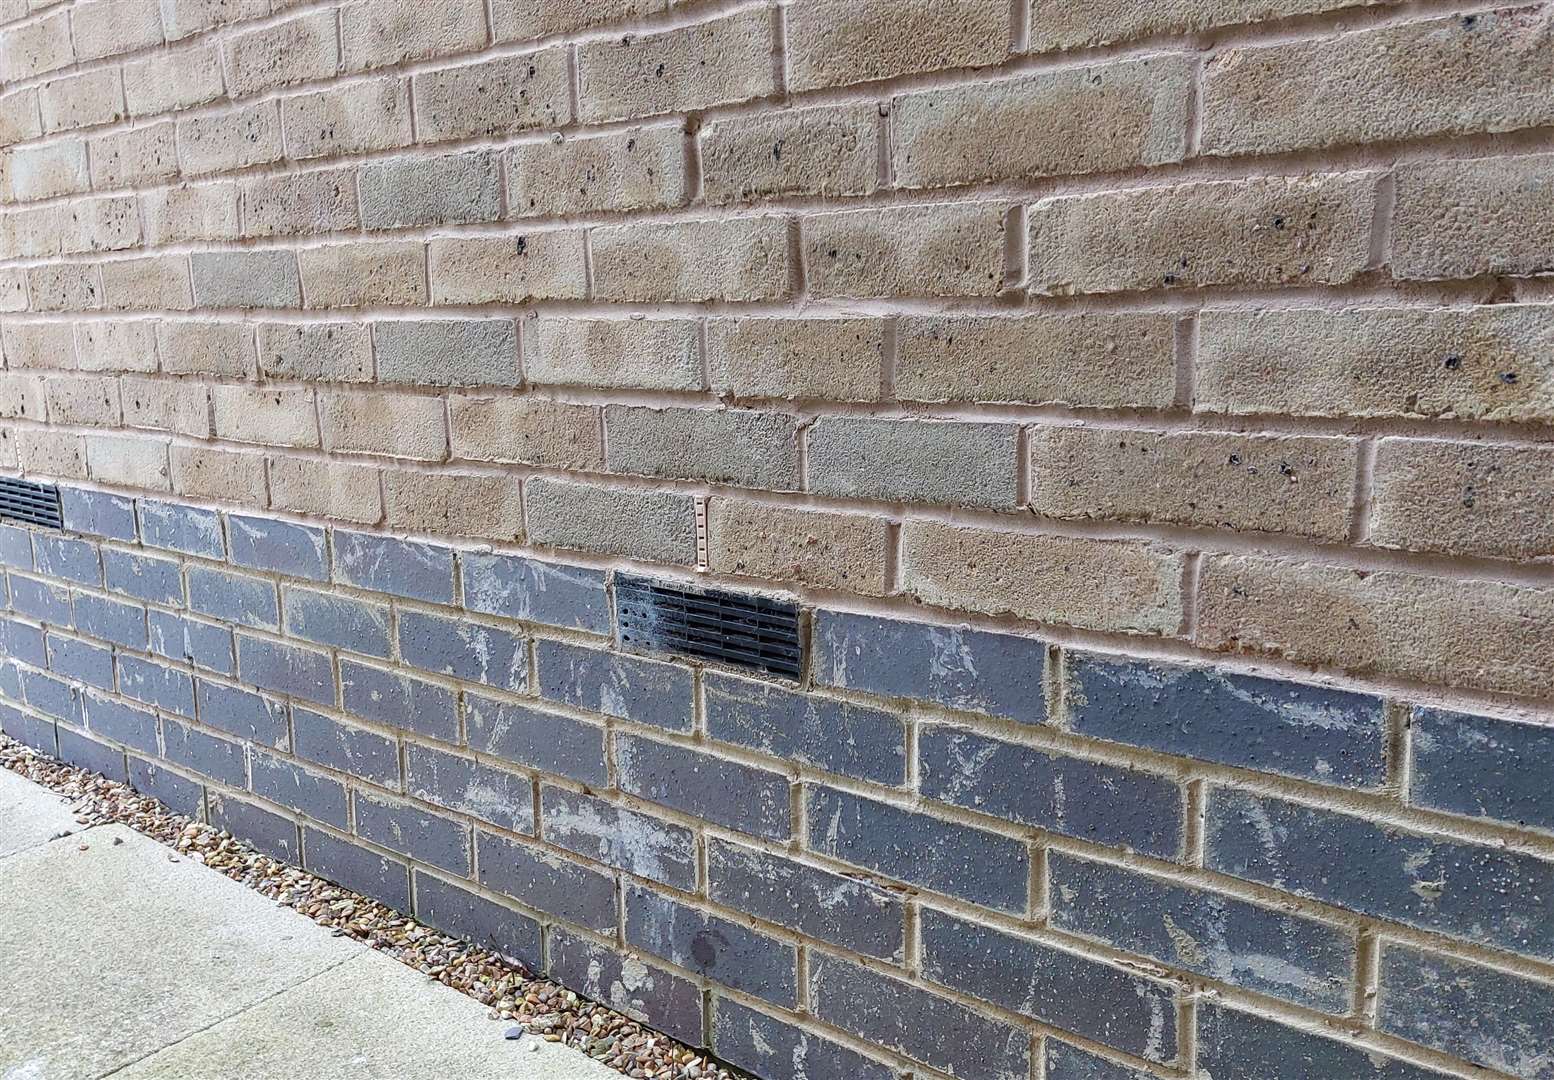 Neighbouring properties have air bricks which are much higher above ground level